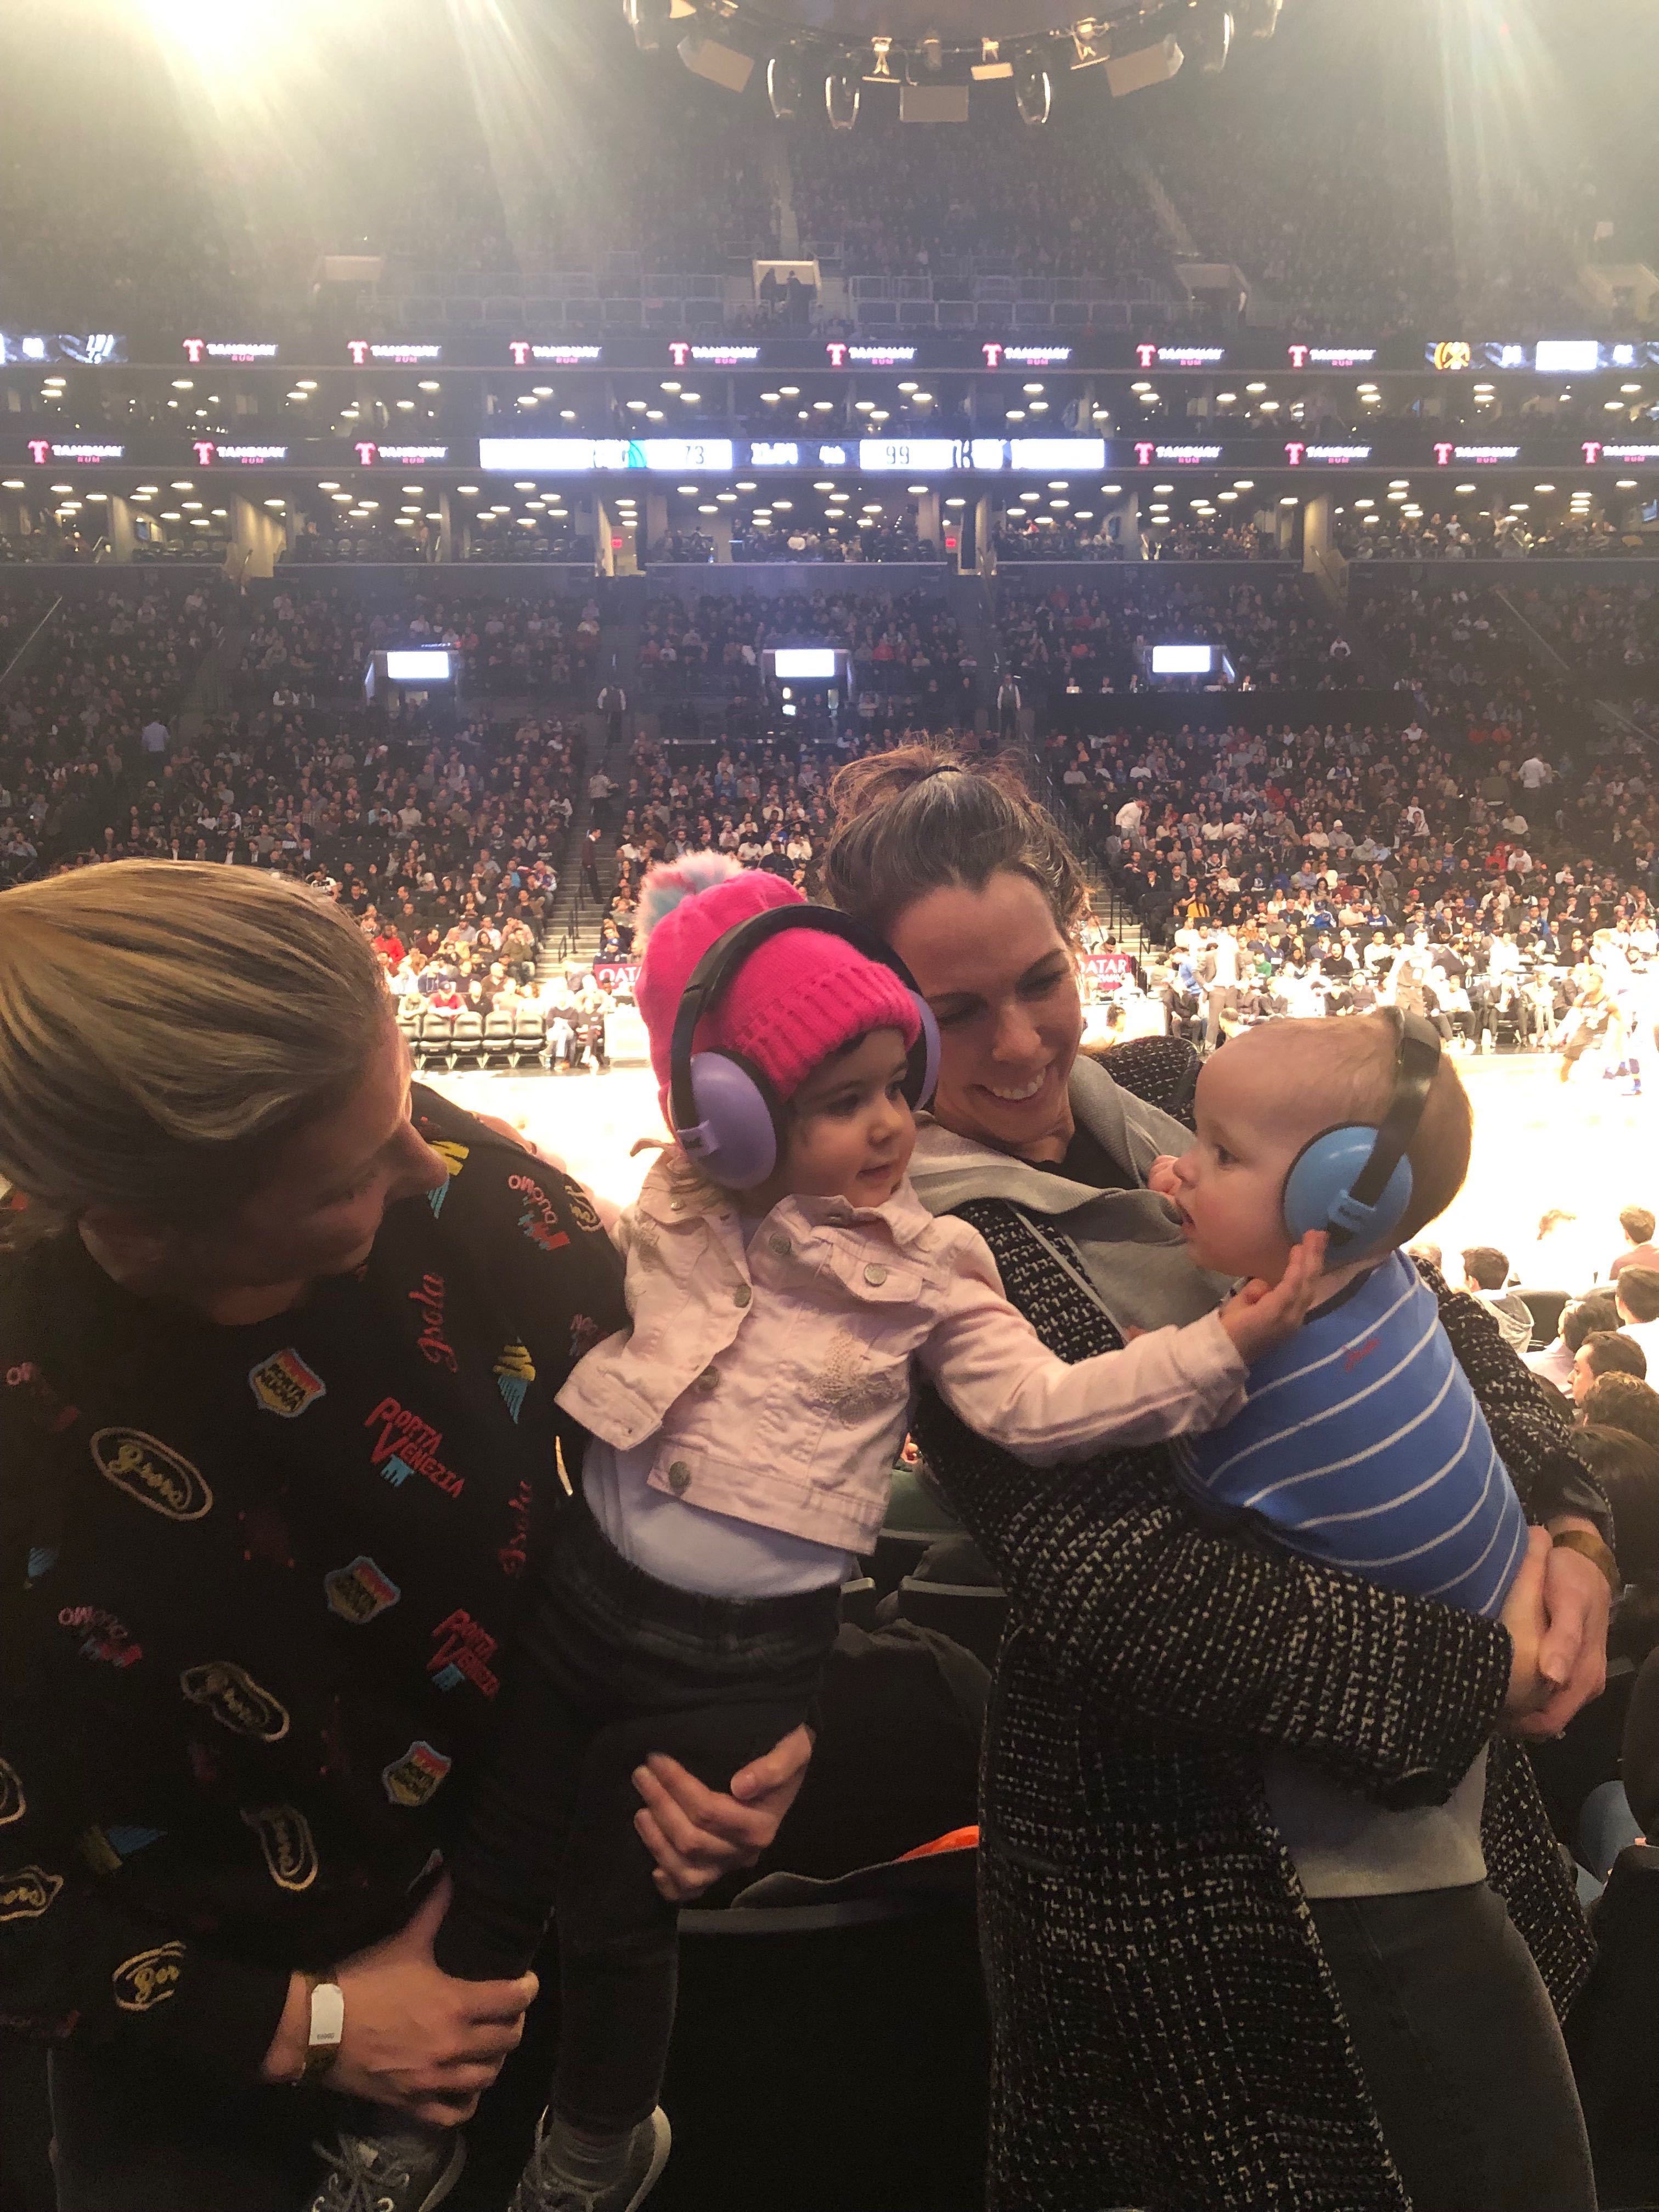 Picture of moms and kids at an NBA game